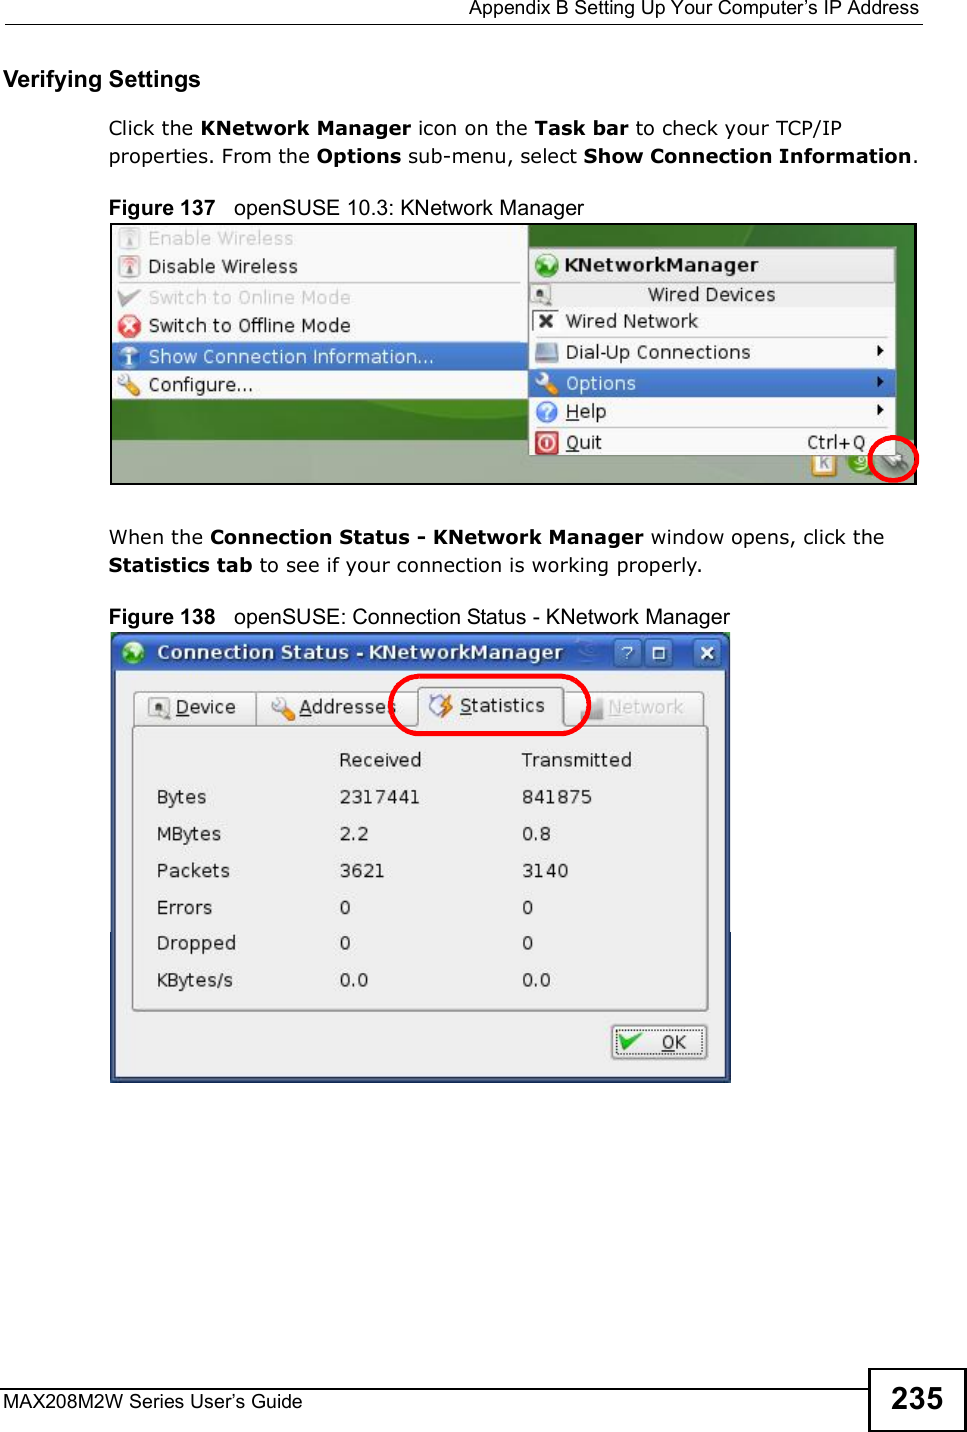  Appendix BSetting Up Your Computer s IP AddressMAX208M2W Series User s Guide 235Verifying SettingsClick the KNetwork Manager icon on the Task bar to check your TCP/IP properties. From the Options sub-menu, select Show Connection Information.Figure 137   openSUSE 10.3: KNetwork ManagerWhen the Connection Status - KNetwork Manager window opens, click the Statistics tab to see if your connection is working properly.Figure 138   openSUSE: Connection Status - KNetwork Manager